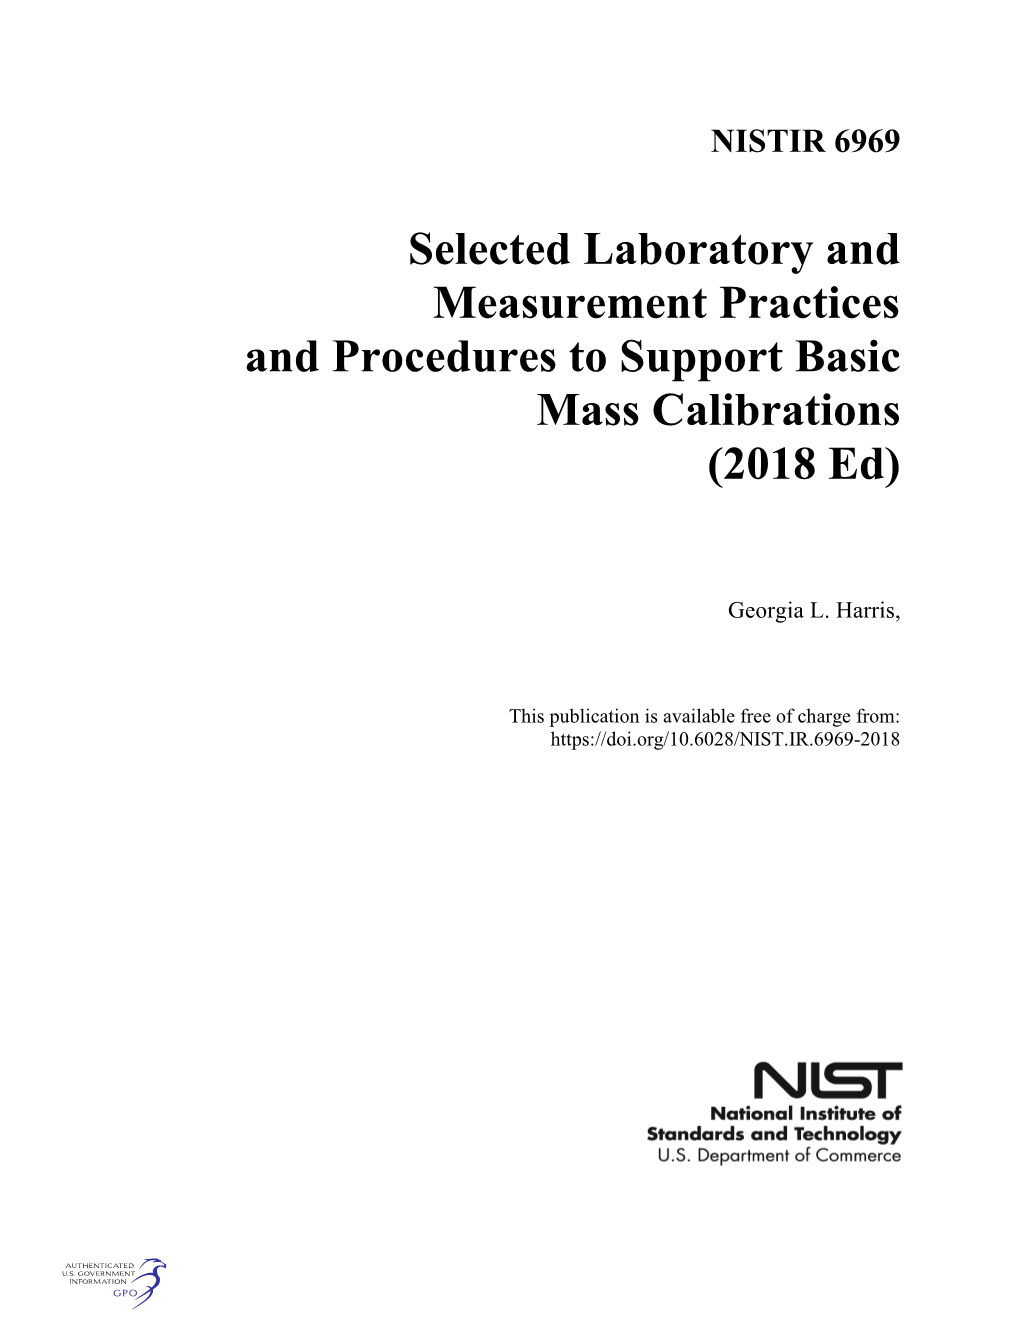 Selected Laboratory and Measurement Practices Procedures